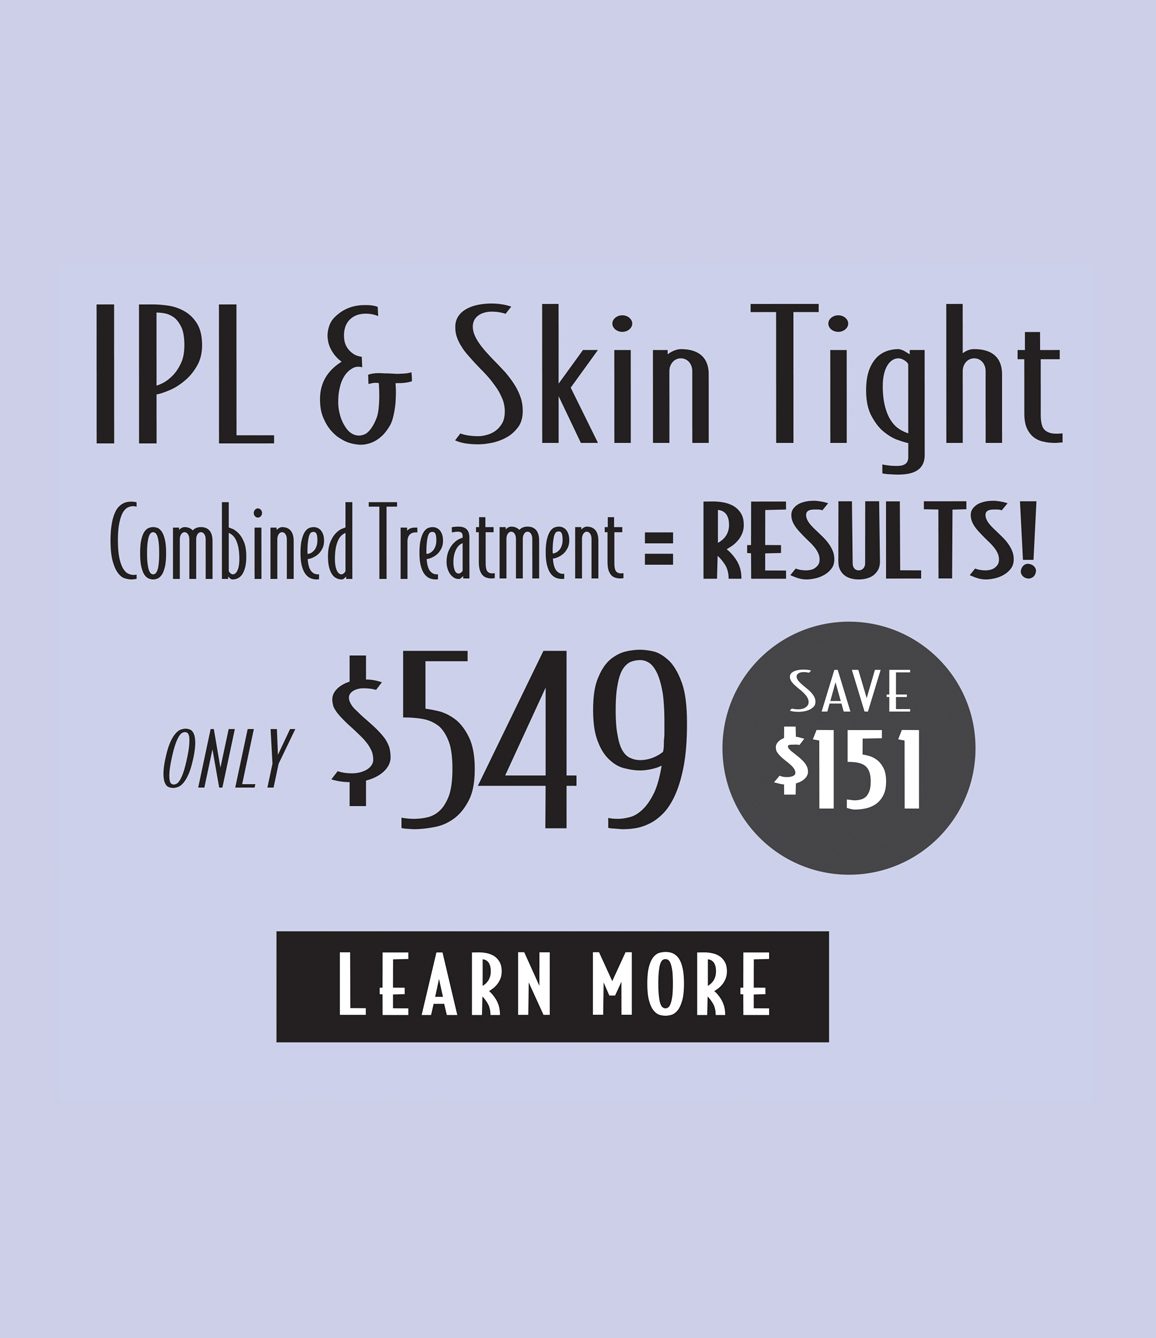 IPL & Skin Tightening Promotion at Gentle Touch